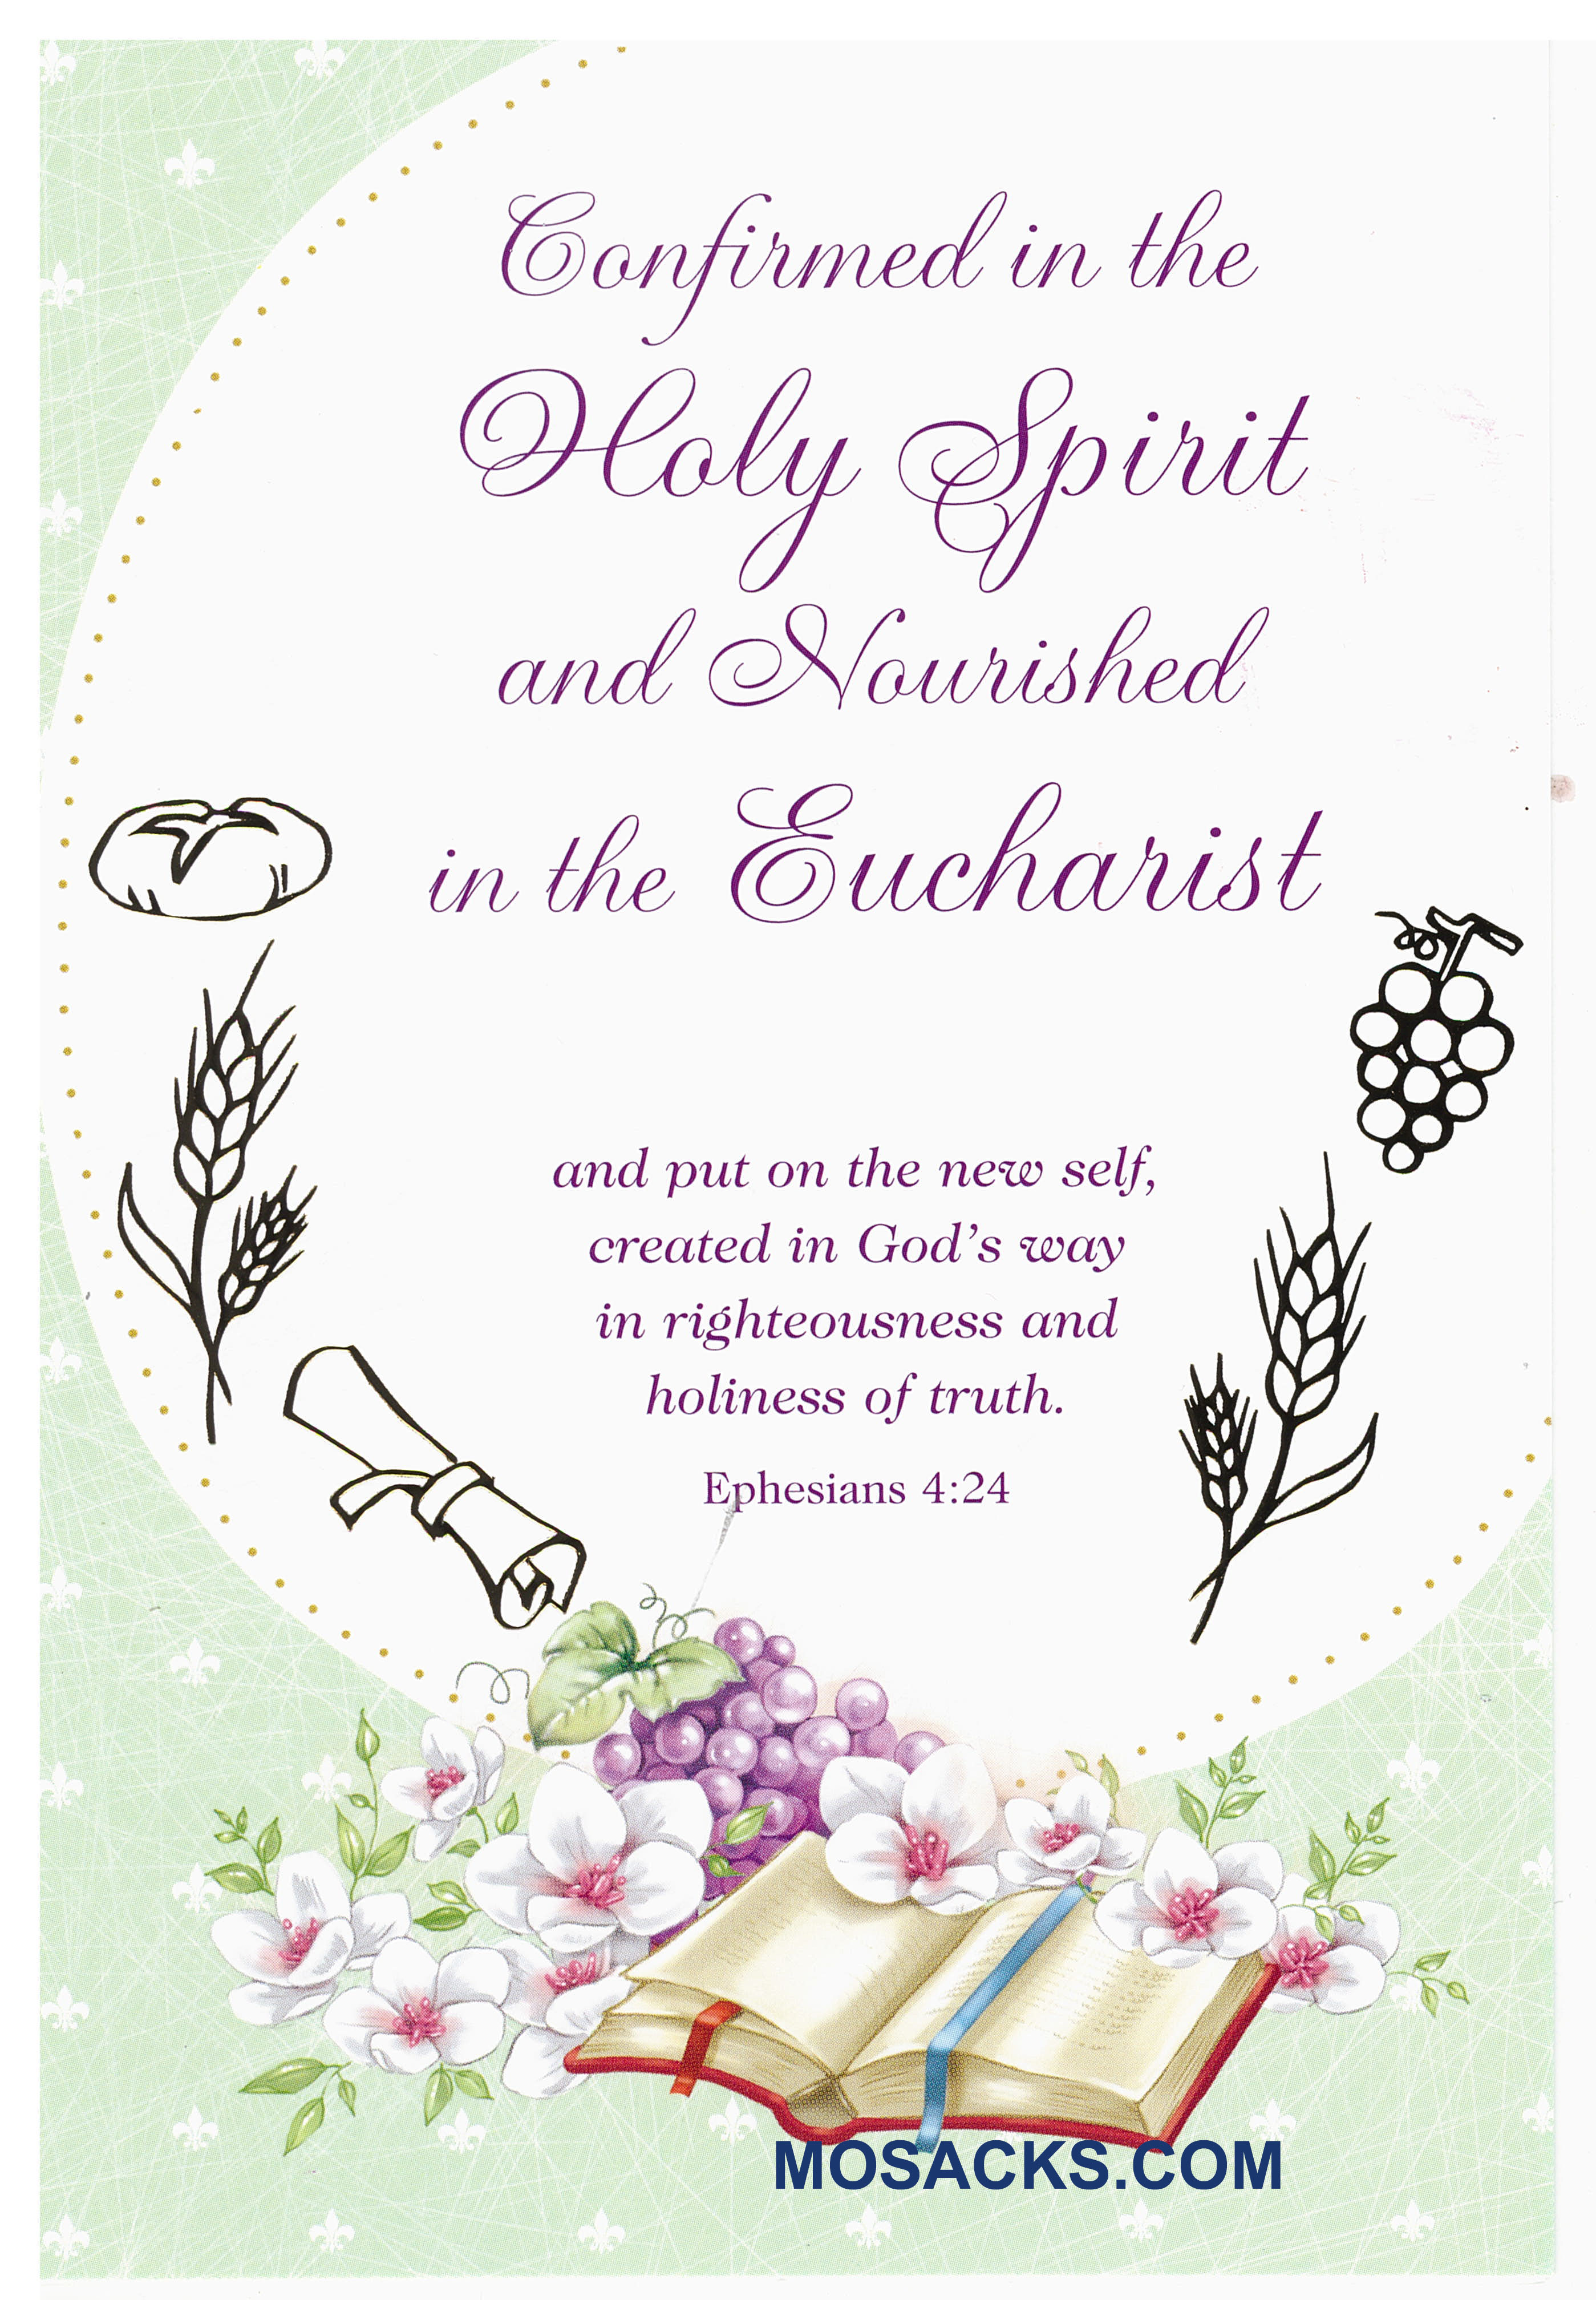 Confirmed in the Holy Spirit and Nourished in the Eucharist Card-87183 An RCIA Greeting Card 